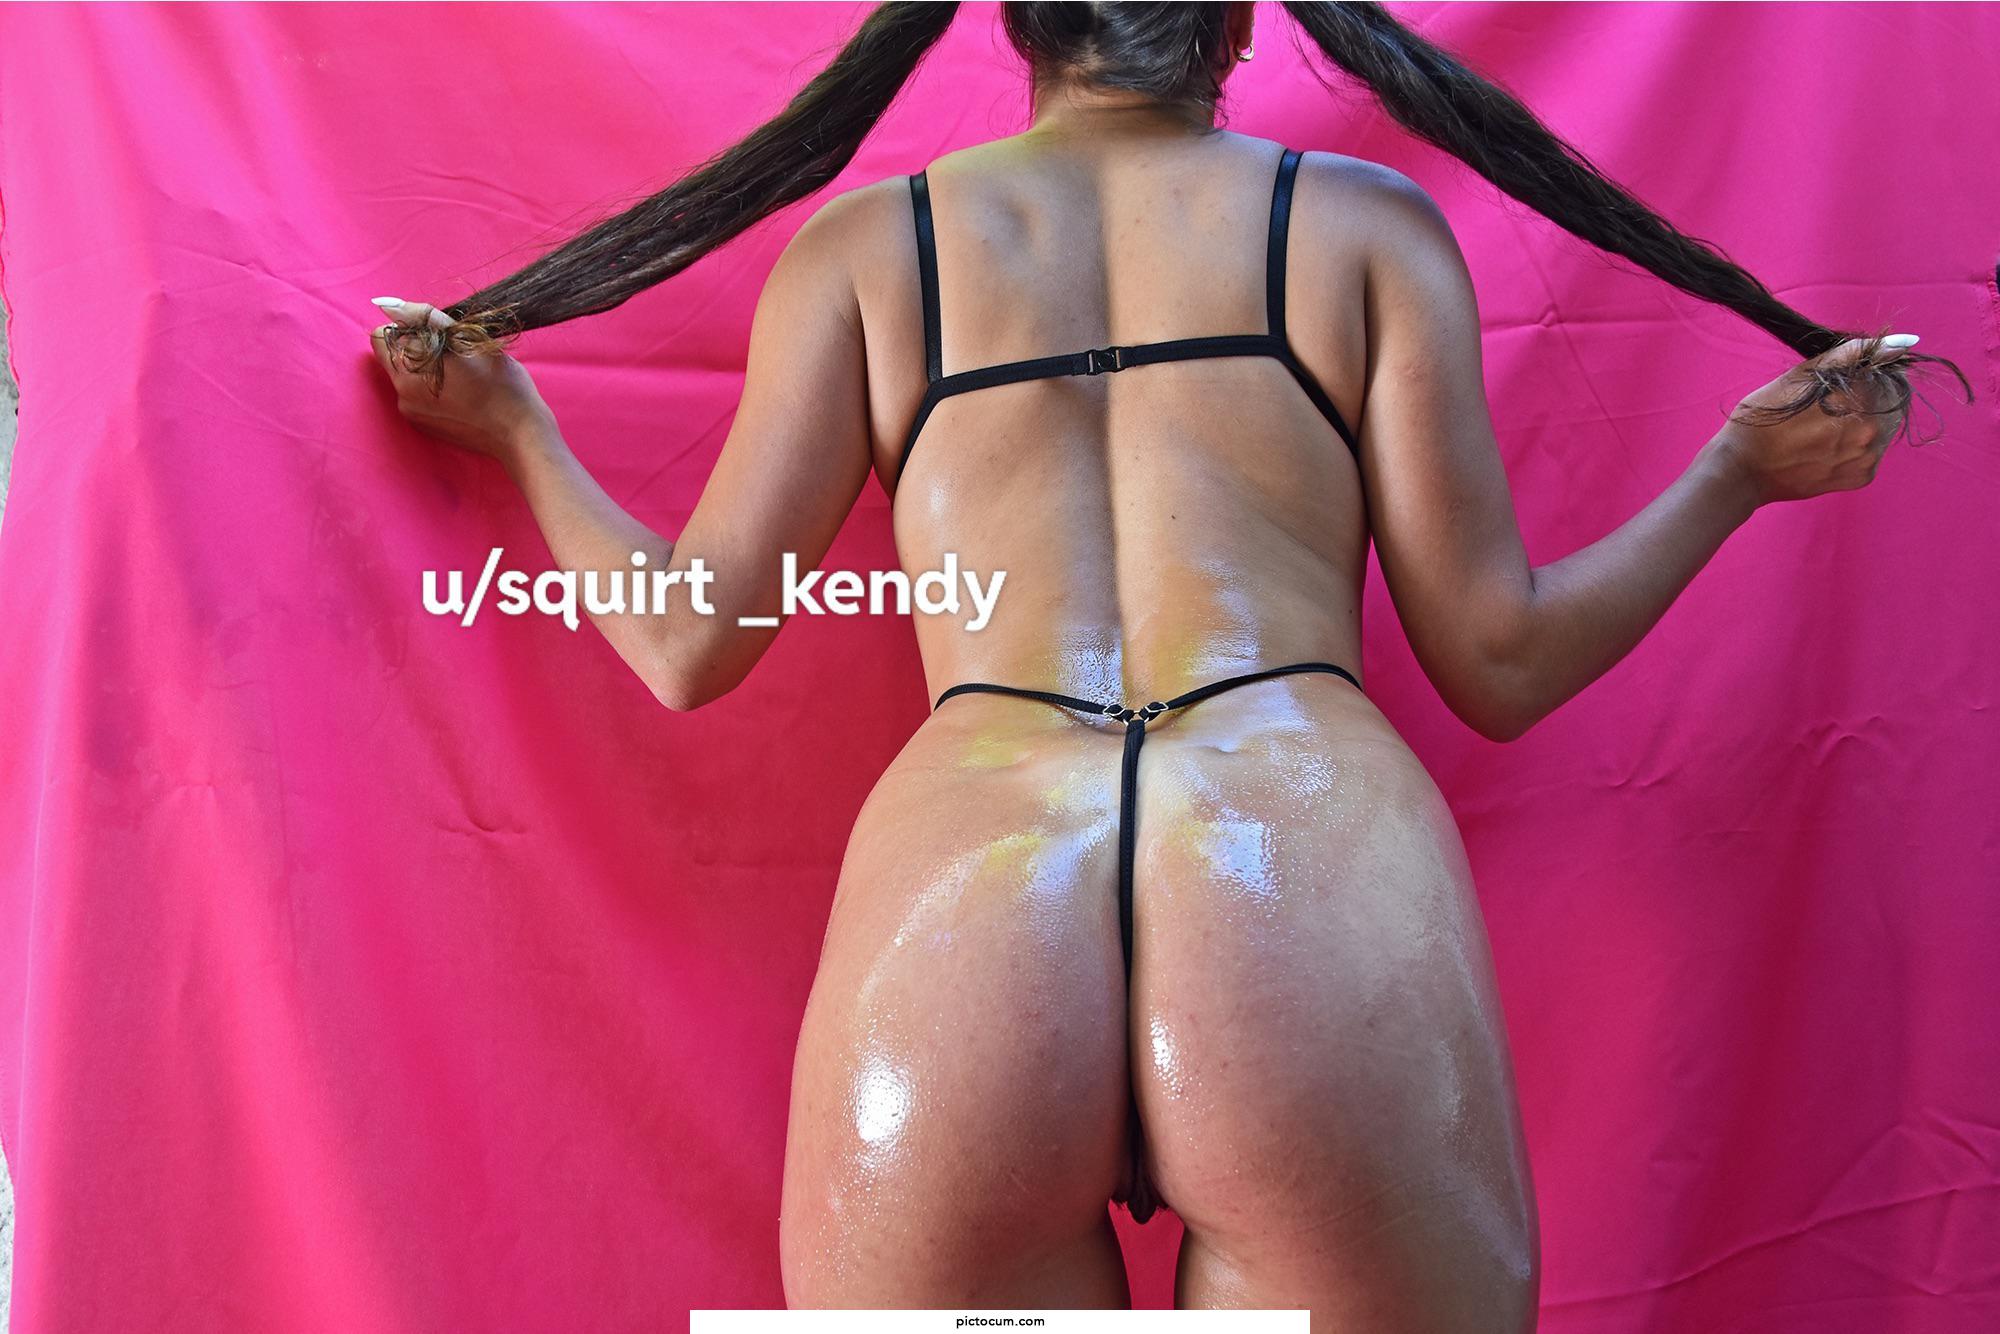 Latina oiled up. Play with me please